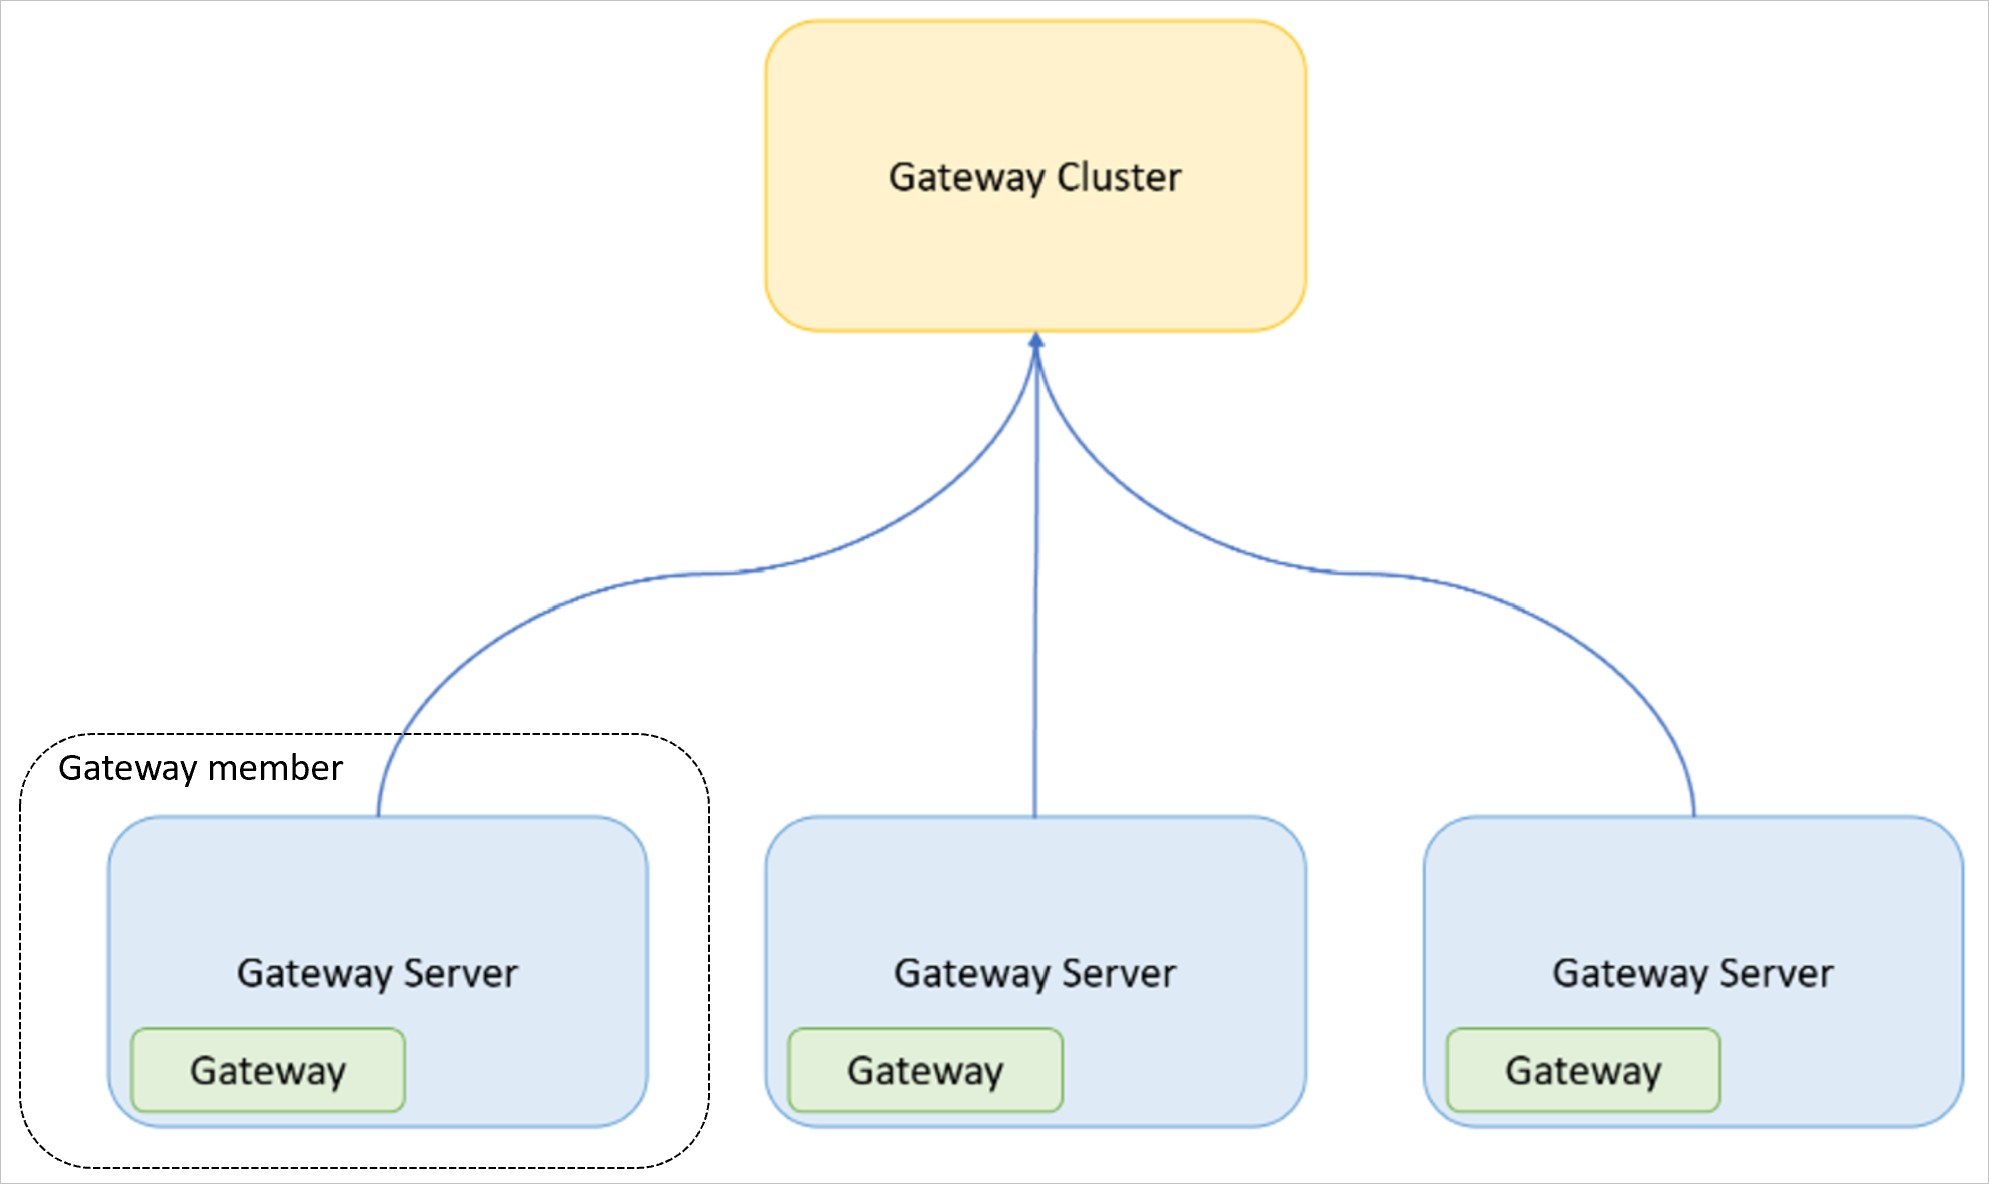 Image of a gateway cluster as part of three gateway servers, each containing a separate gateway